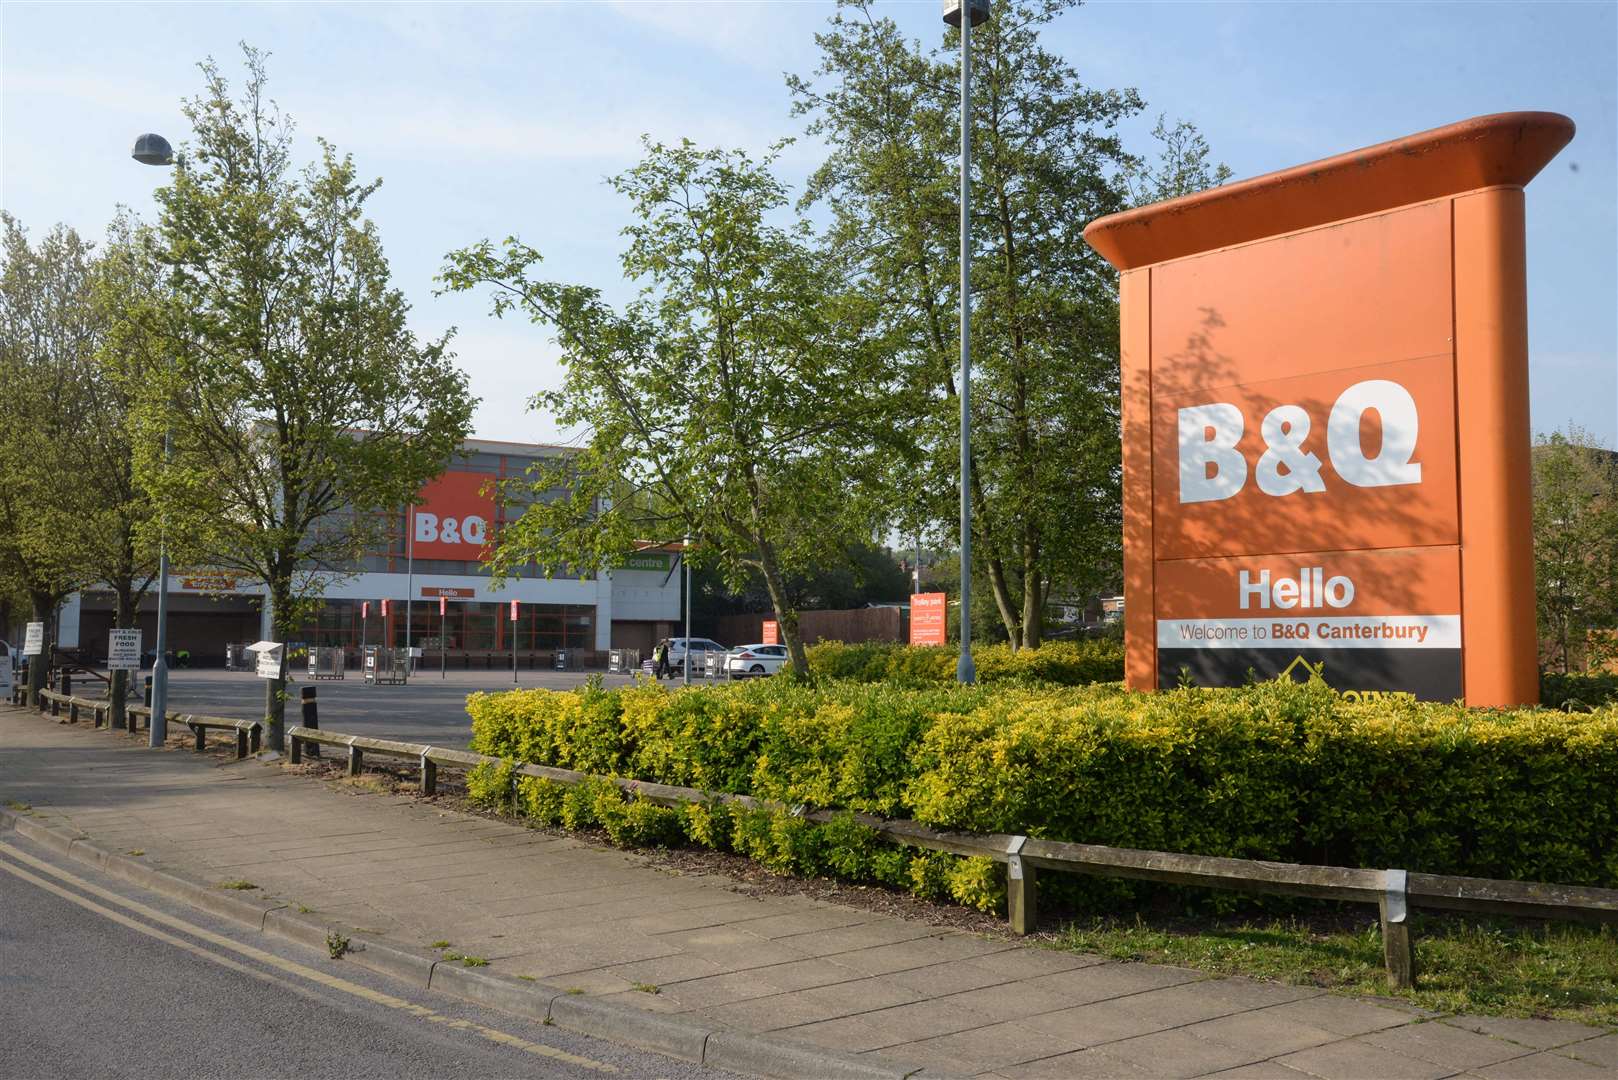 The B&Q store boasts a 280+ space car park which will be used by Aldi and coffee shop customers